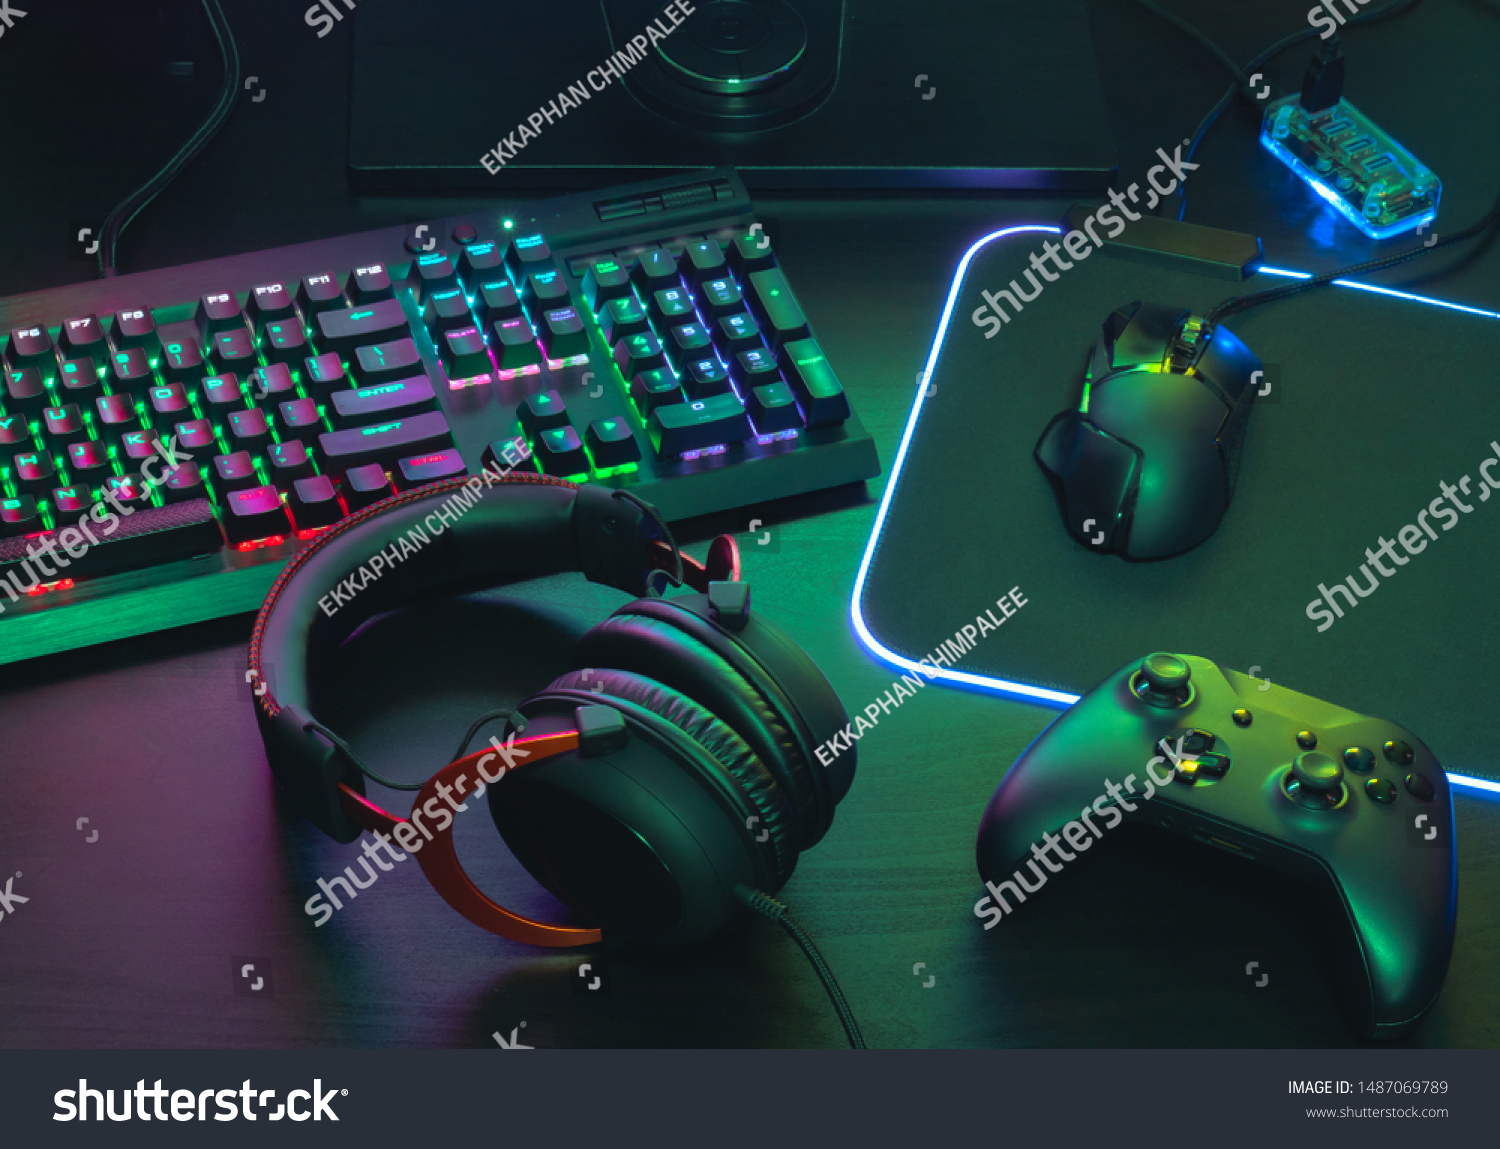 gamer work space concept, top view a gaming gear, mouse, keyboard, joystick, headset, mobile joystick, in ear headphone and mouse pad with rgb color on black table background. #1487069789